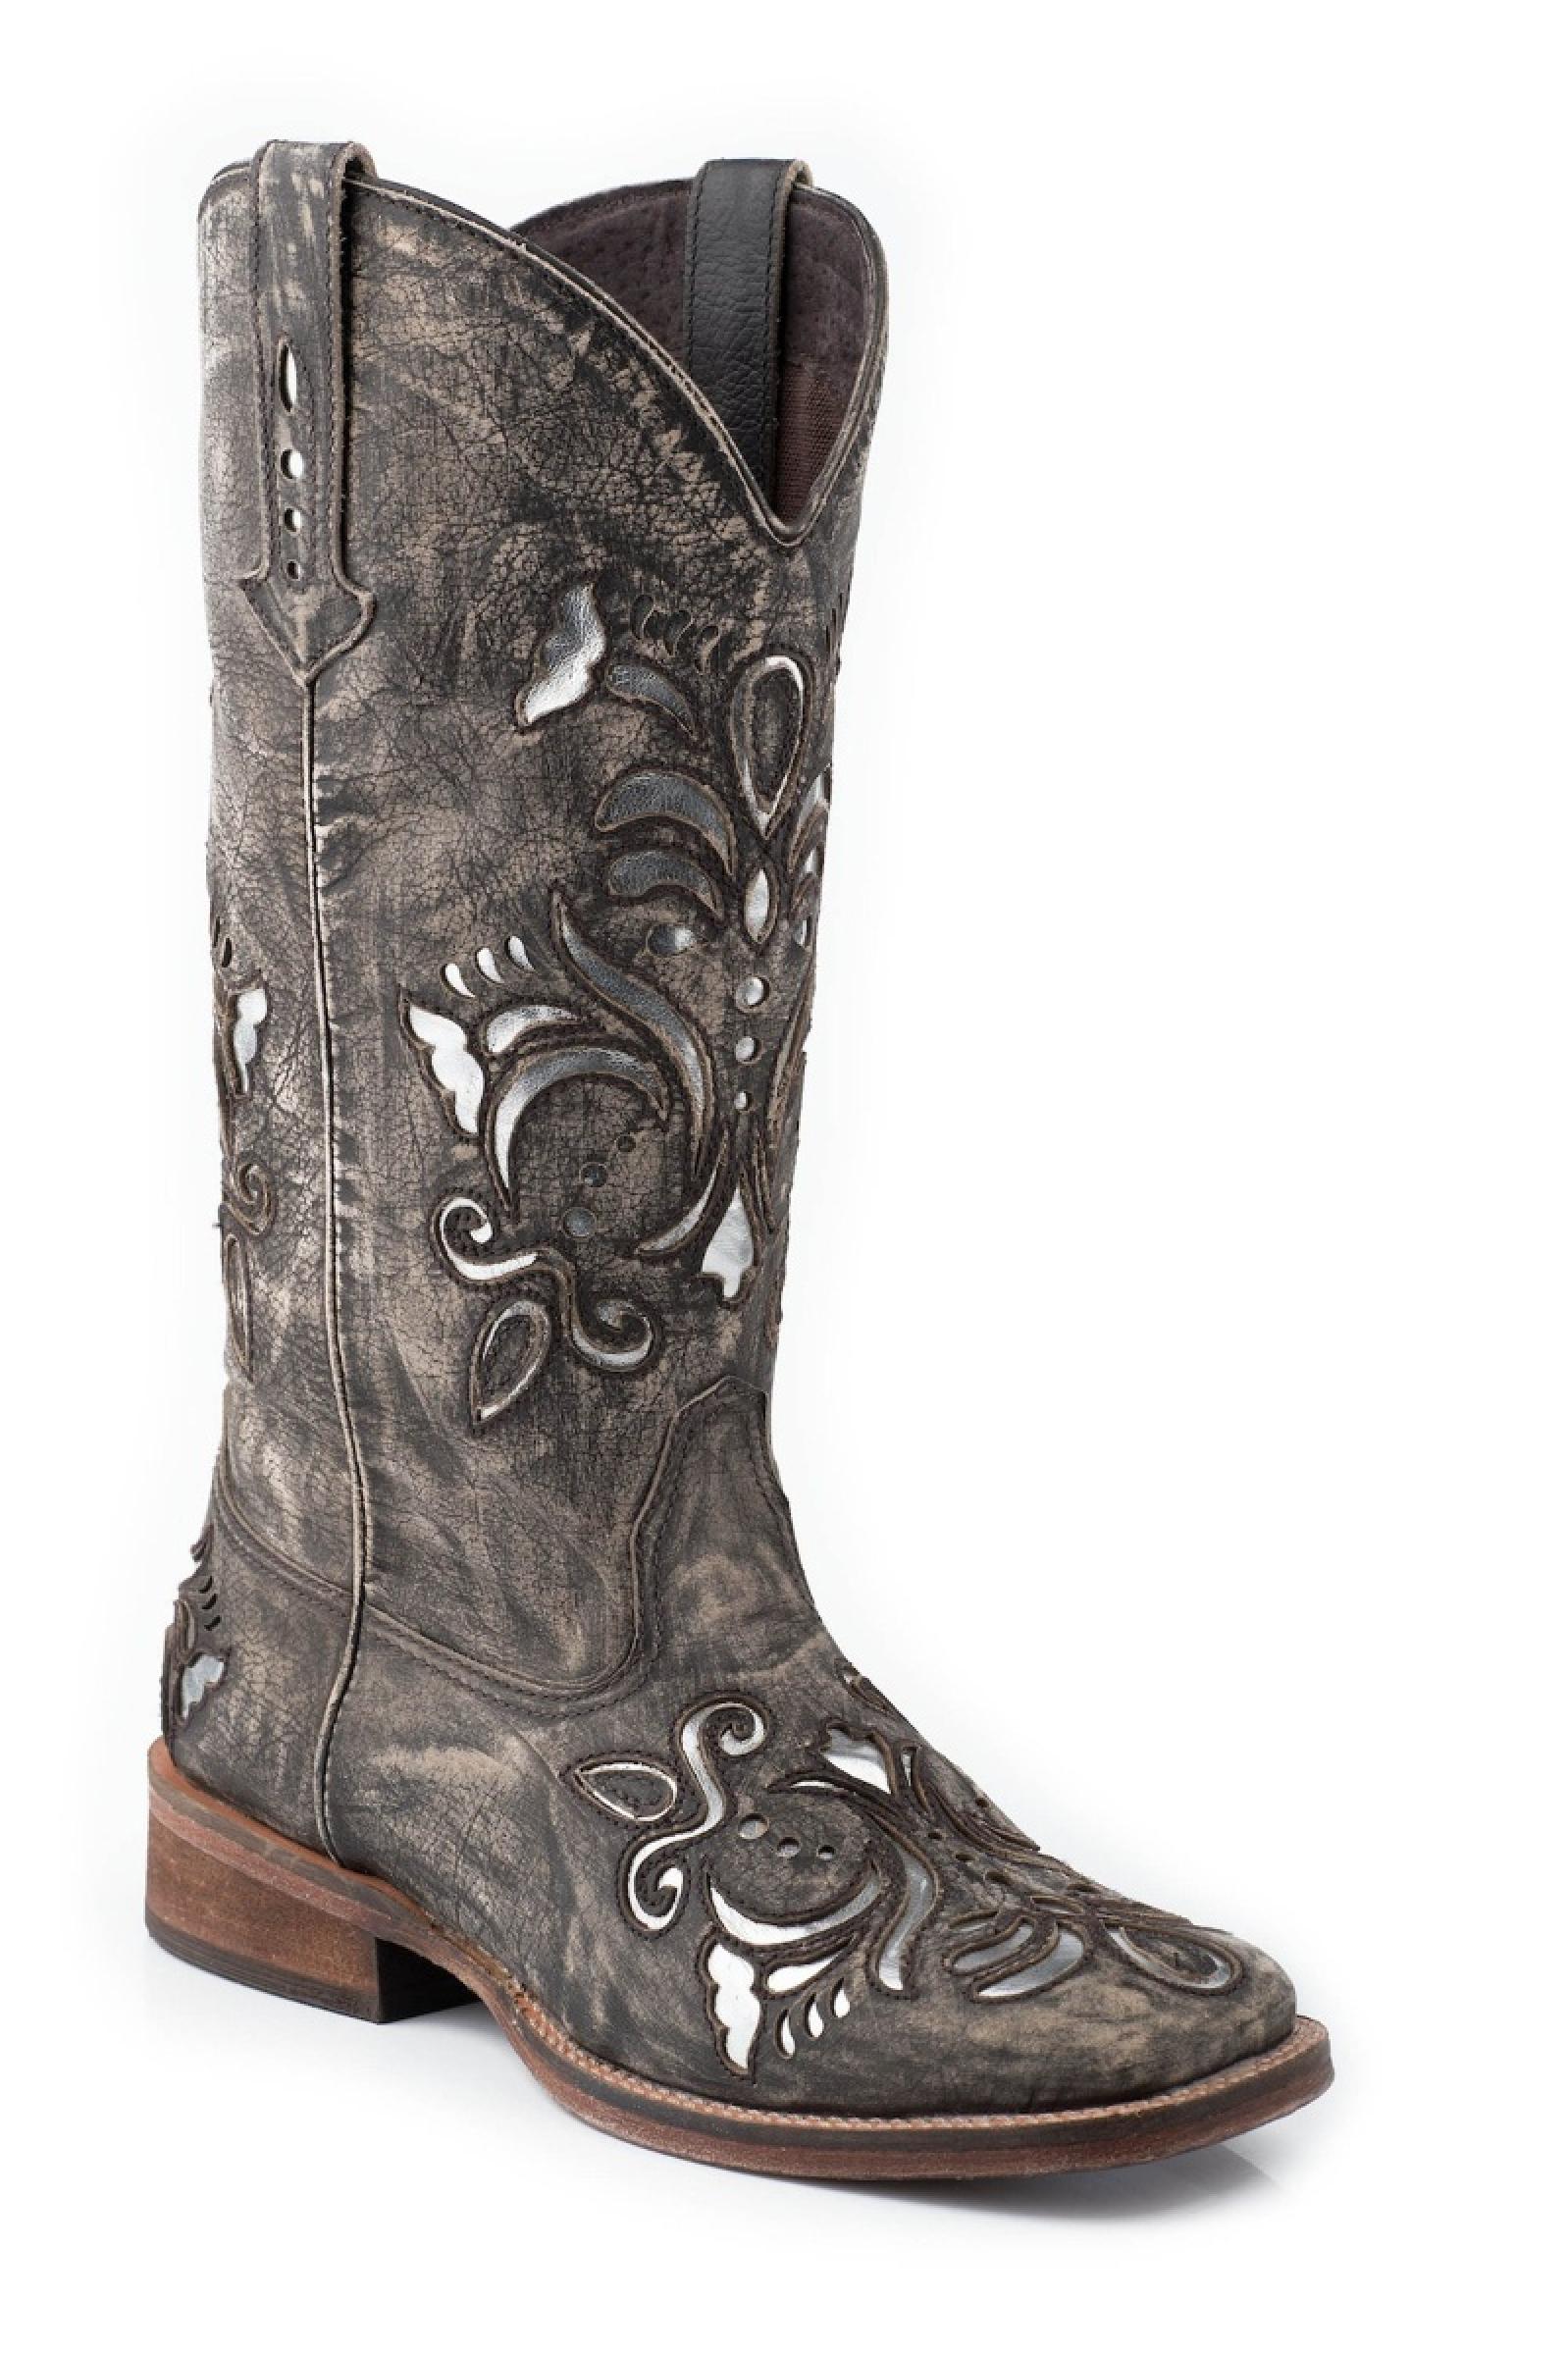 Roper Women's Silver Underlay Square Toe Cowboy Boots